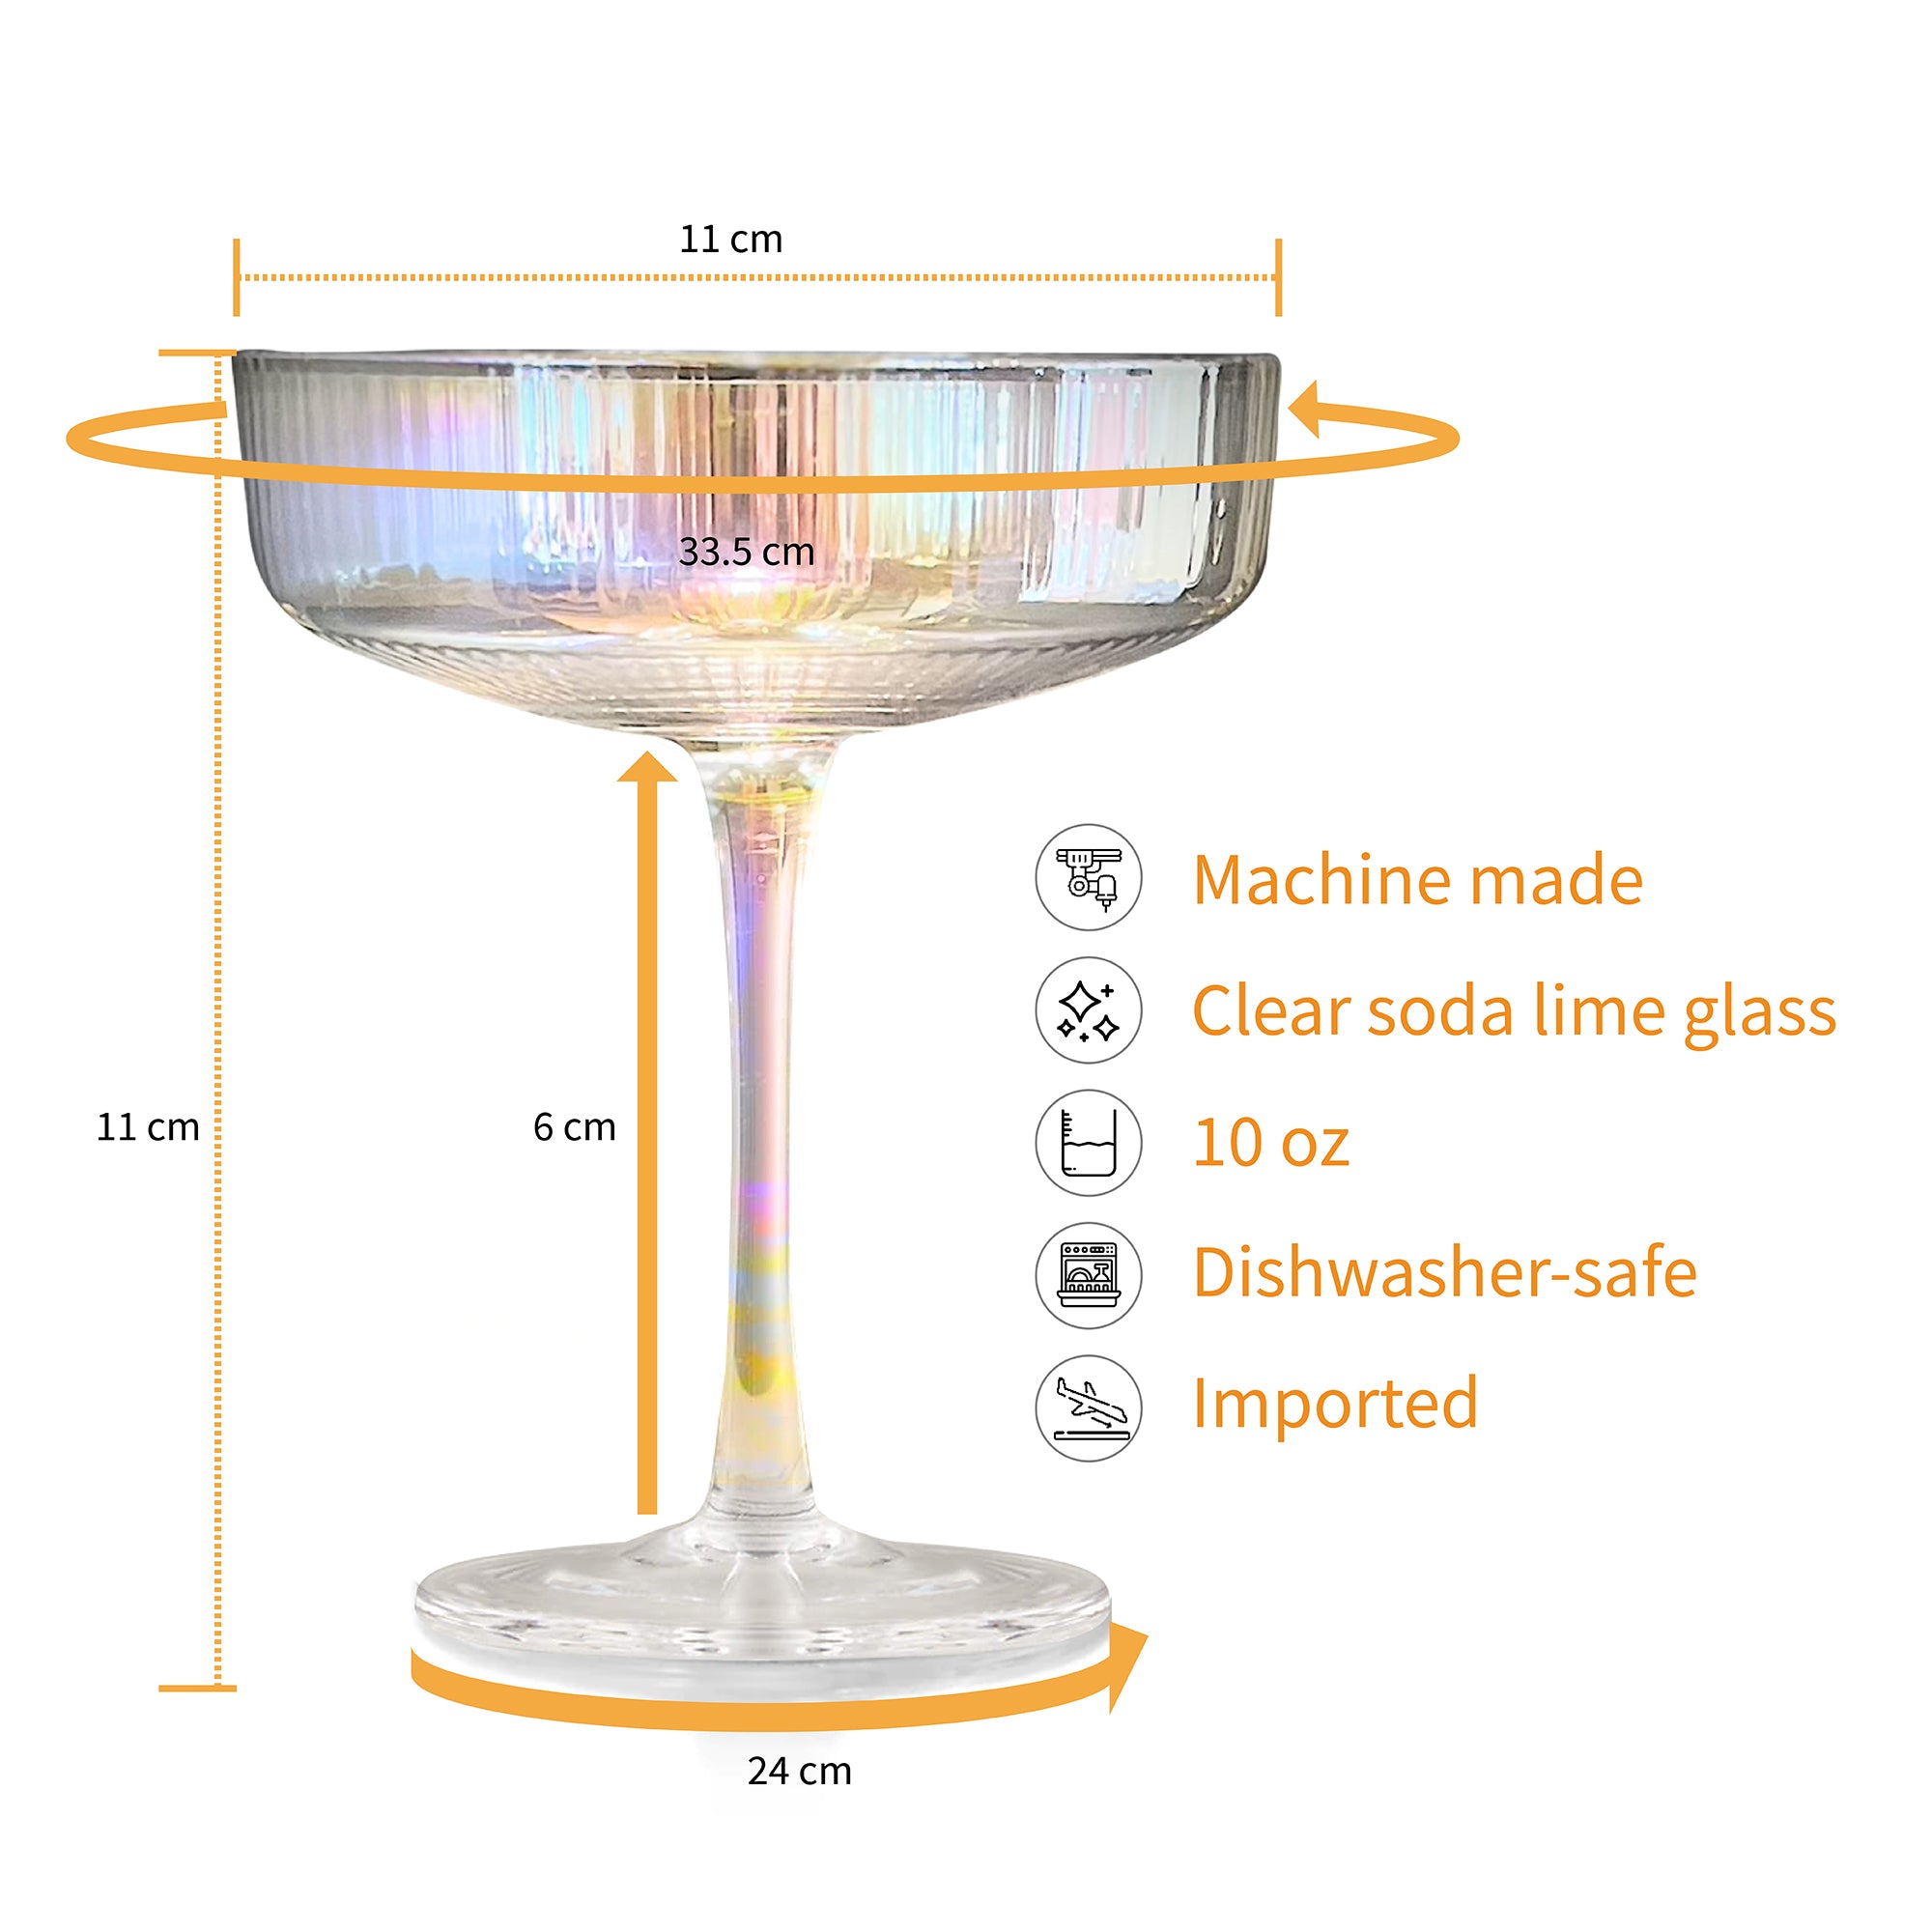 Eve Smoke Coupe Cocktail Glasses Set of 8 + Reviews